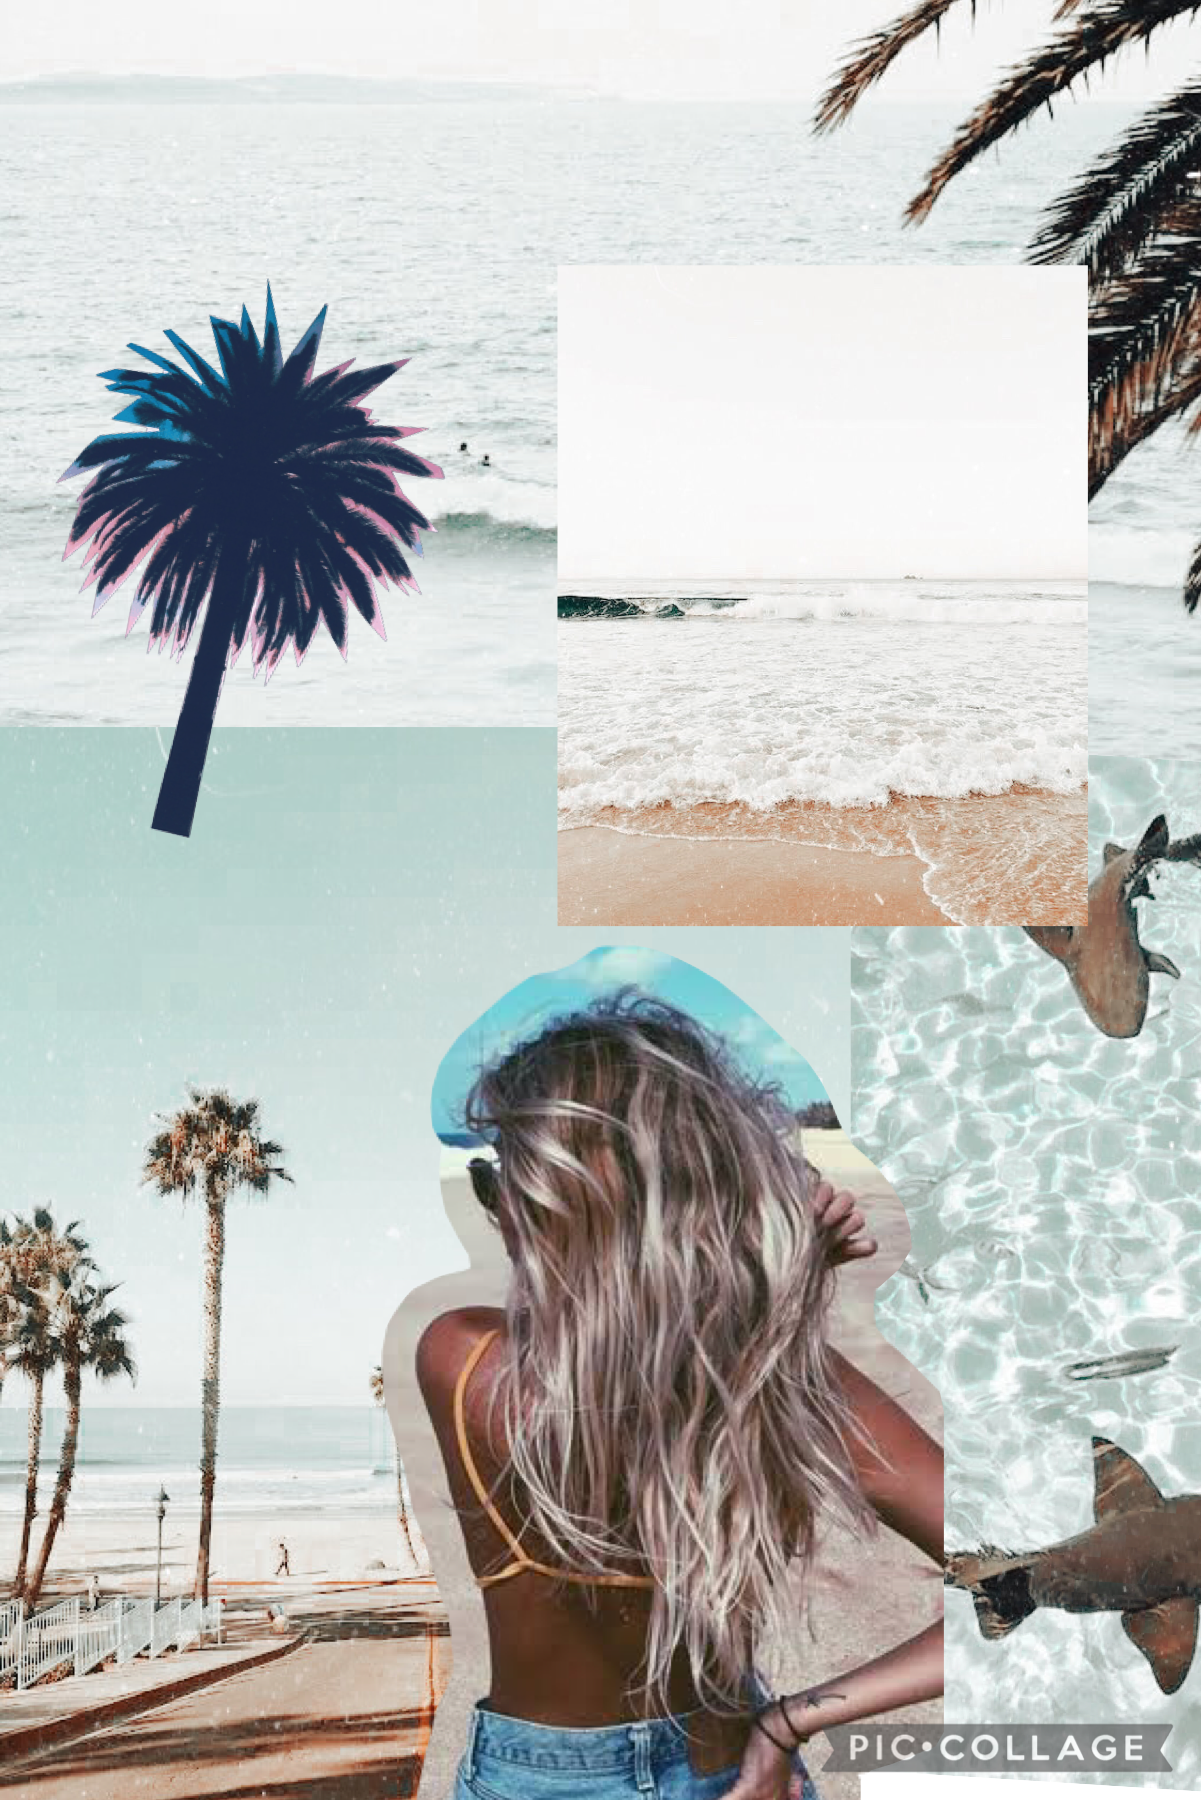 Another beachy collage ✌🏽🤙🏽